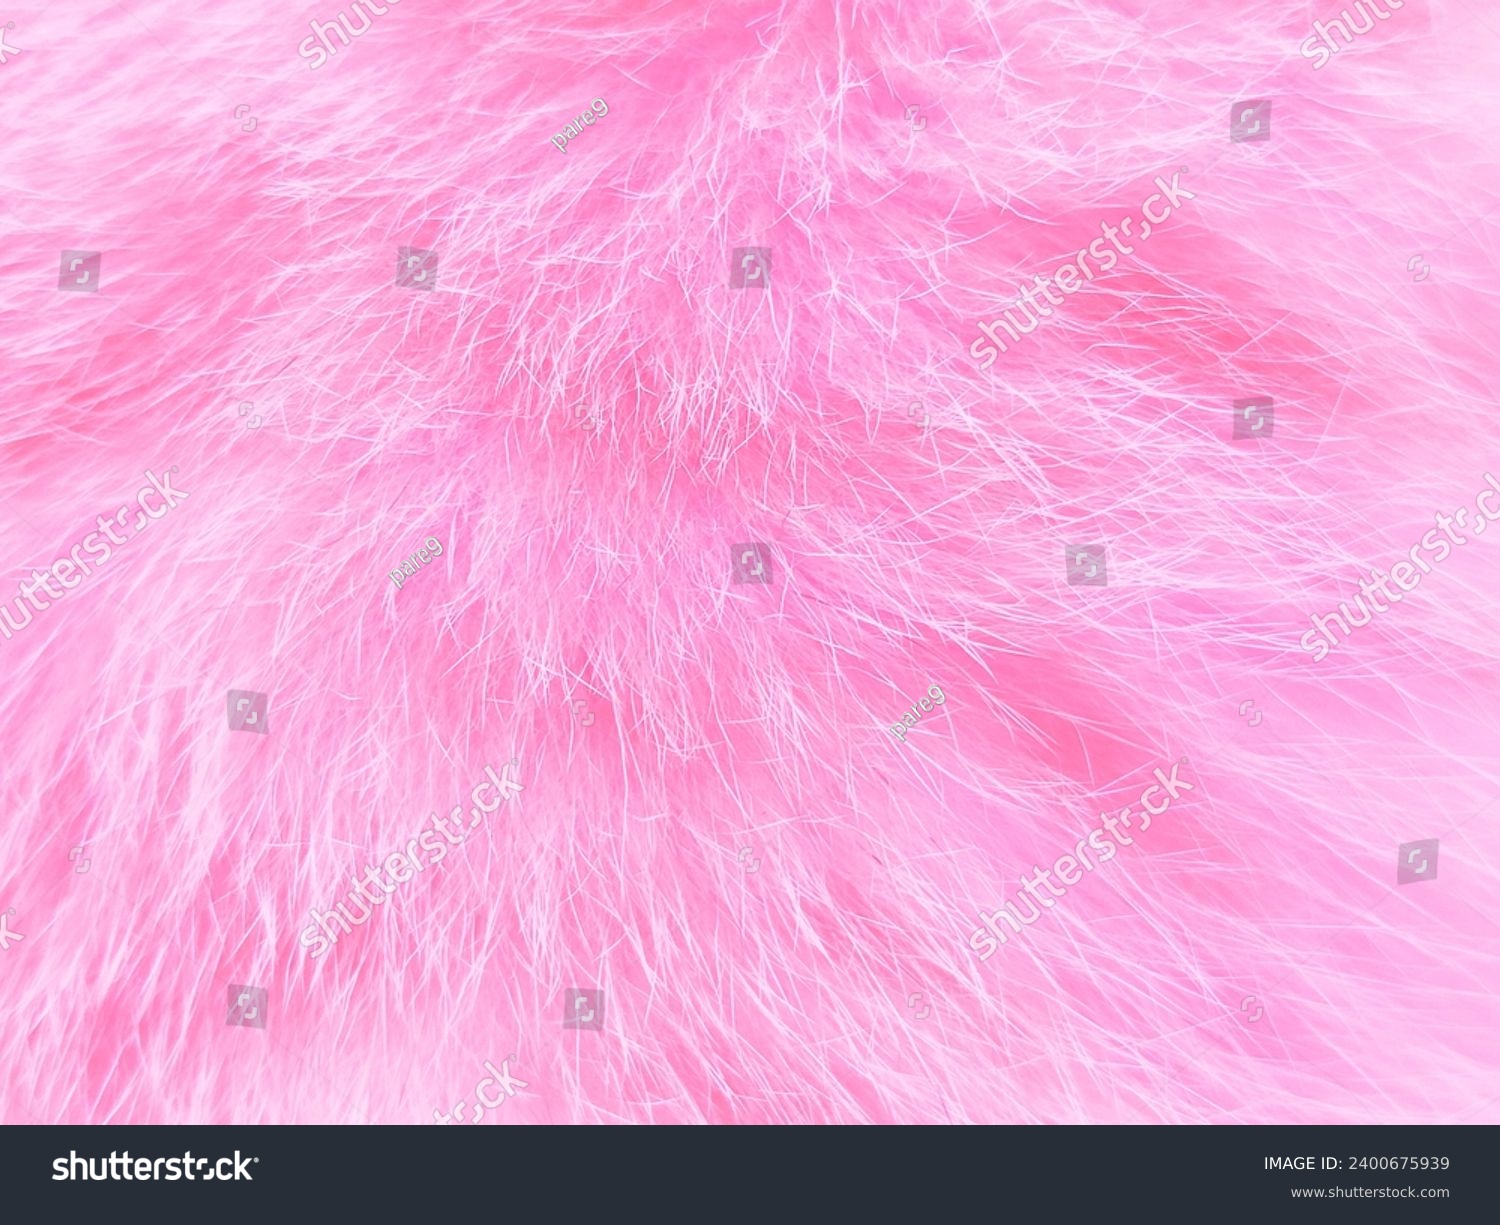 Pink watercolor mohair texture background. Wool fabric for text design. Abstract wallpapers, textile textures and illustrations #2400675939